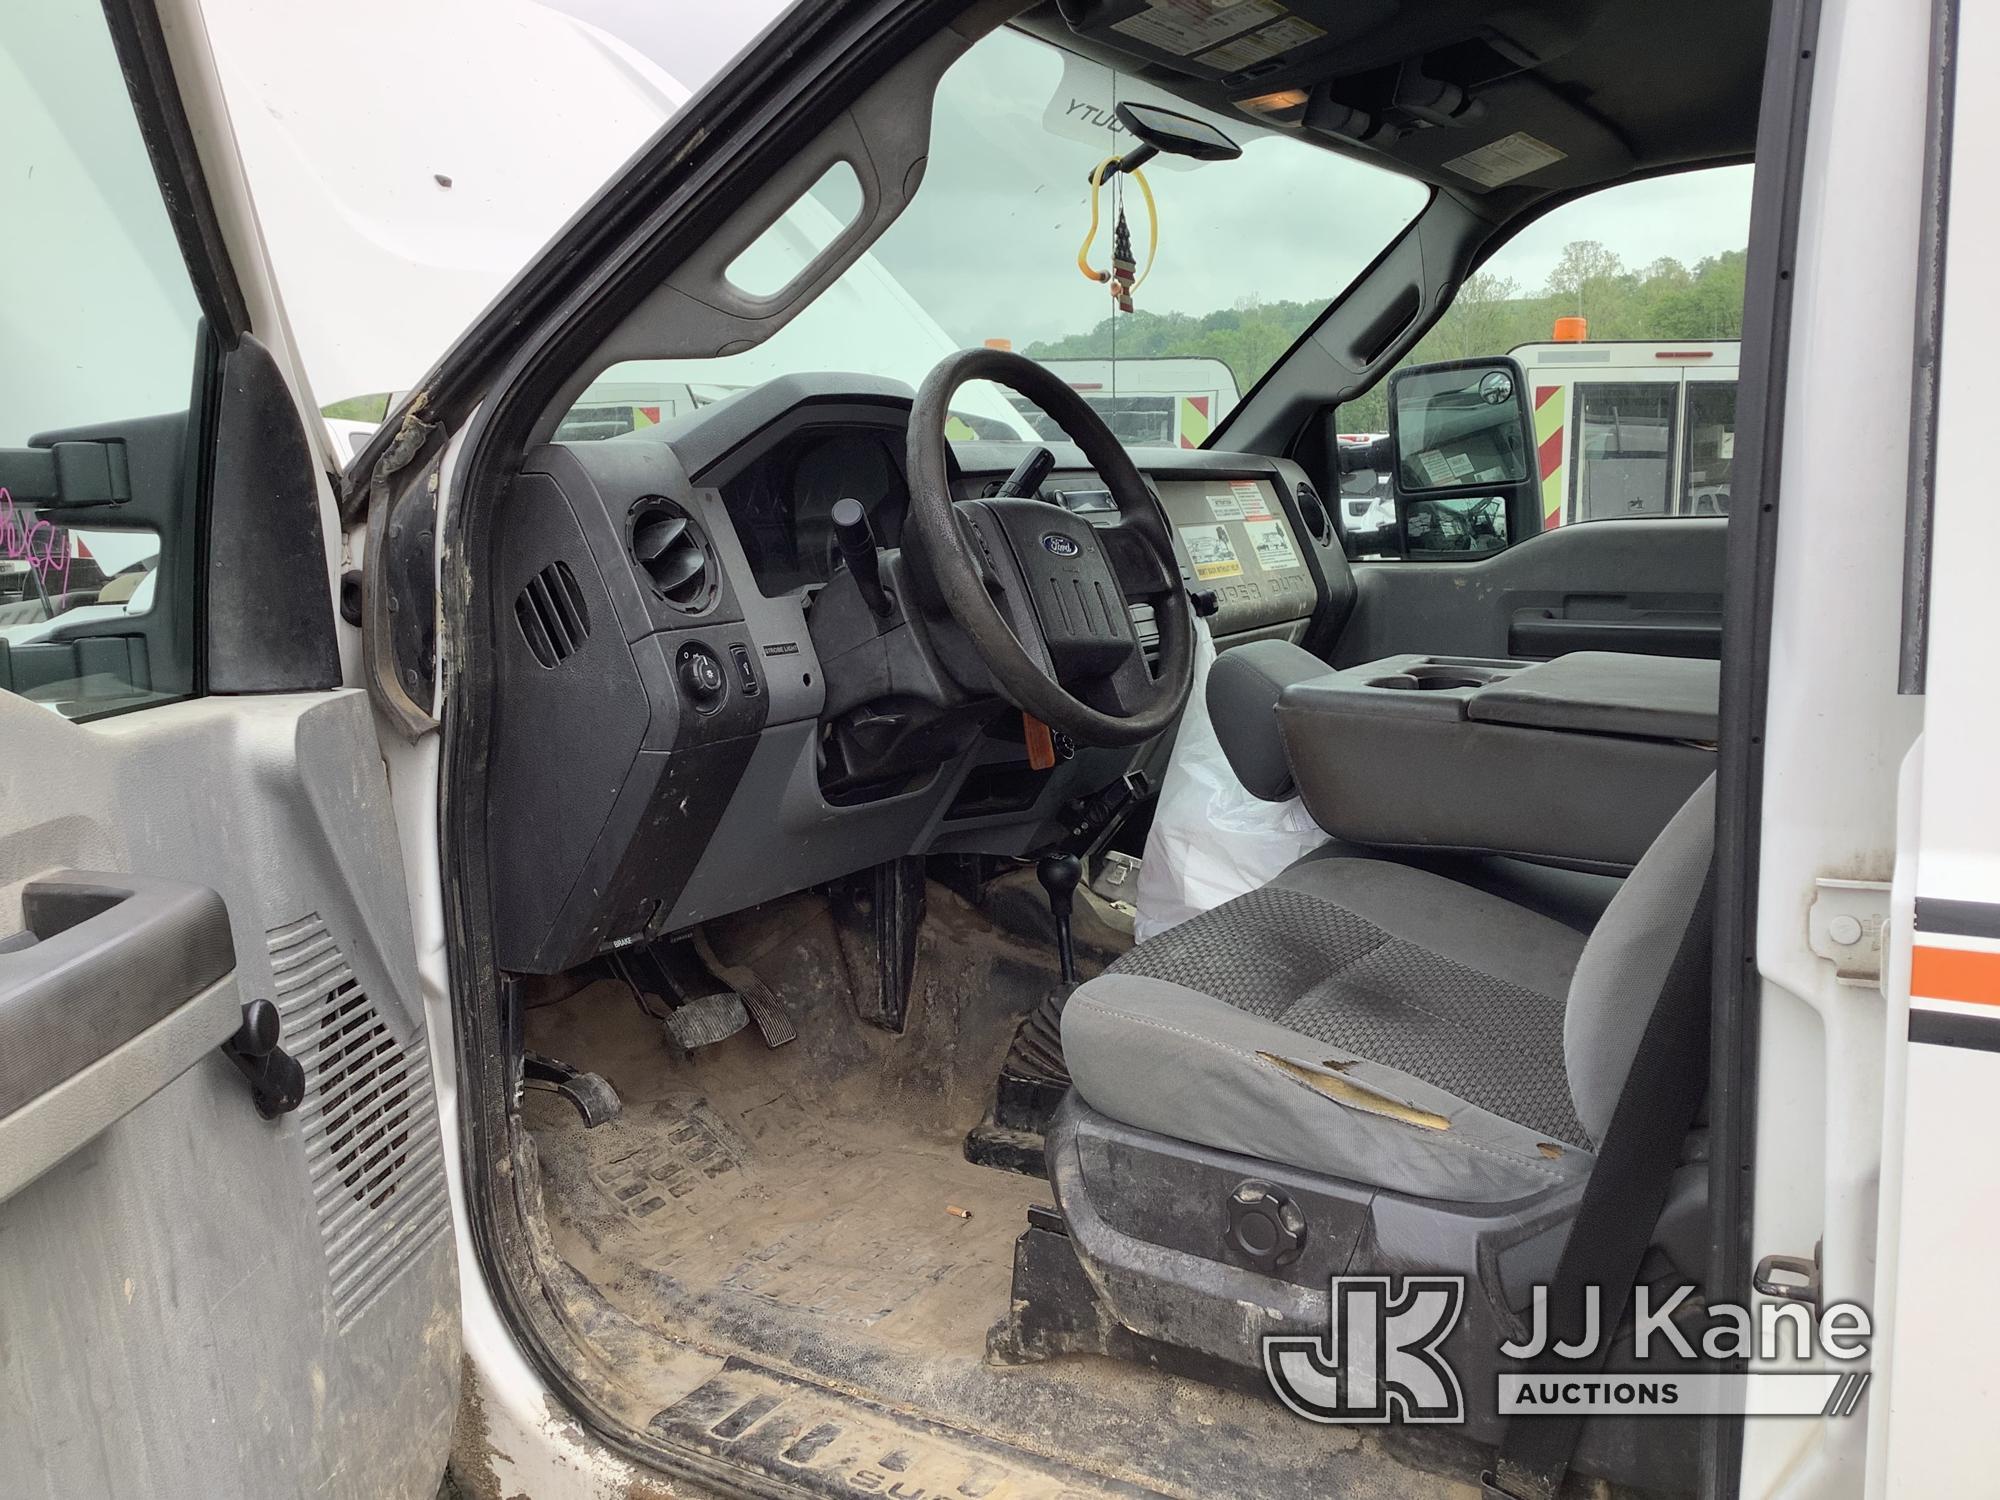 (Smock, PA) 2015 Ford F250 4x4 Crew-Cab Pickup Truck Runs Rough, Moves In 4WD Only, Engine Knock, Ch